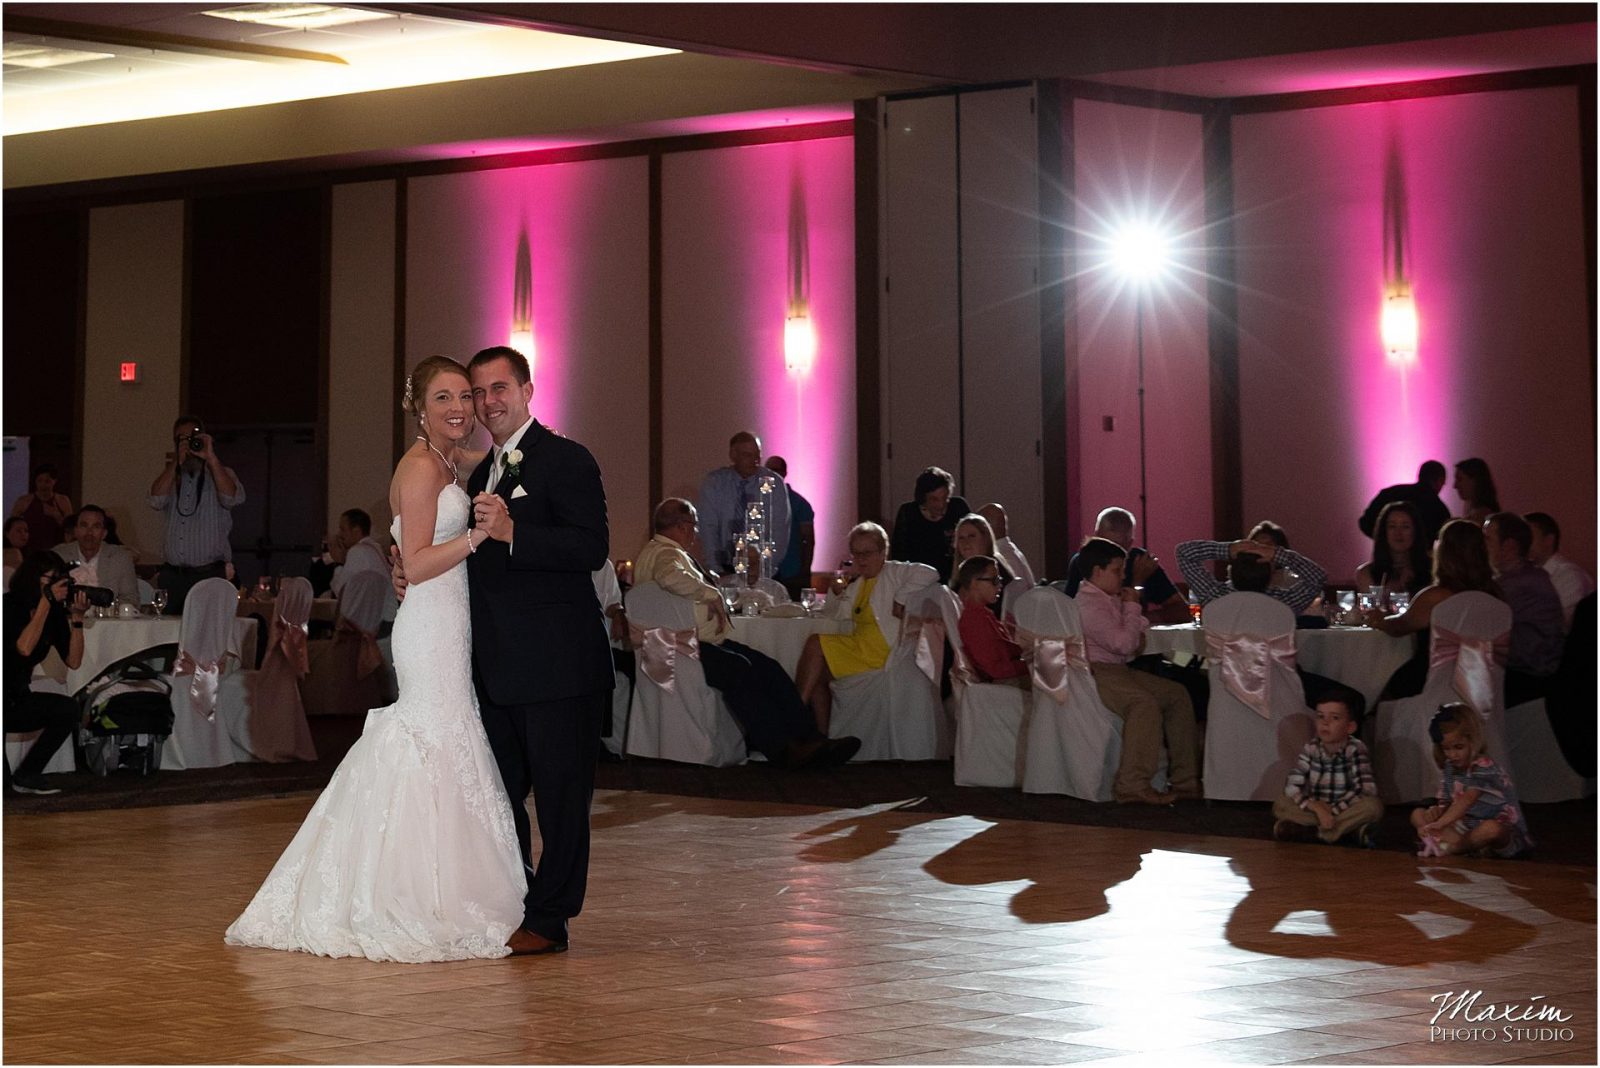 , Ali + Andrew | Oasis Conference Center wedding